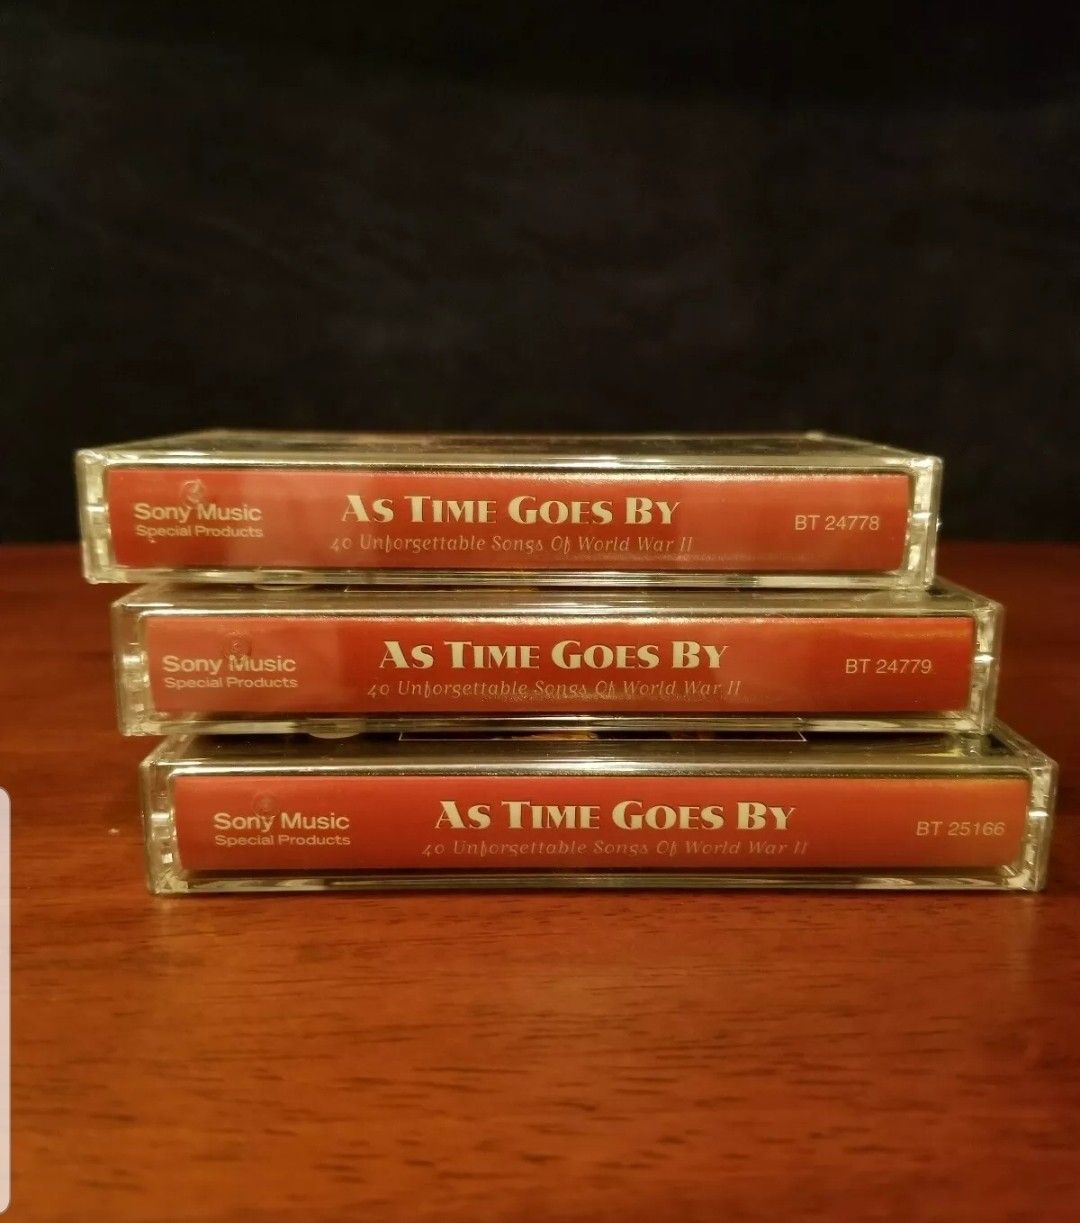 As Time Goes By 3 Cassette Tapes Unforgettable Songs Of World War II